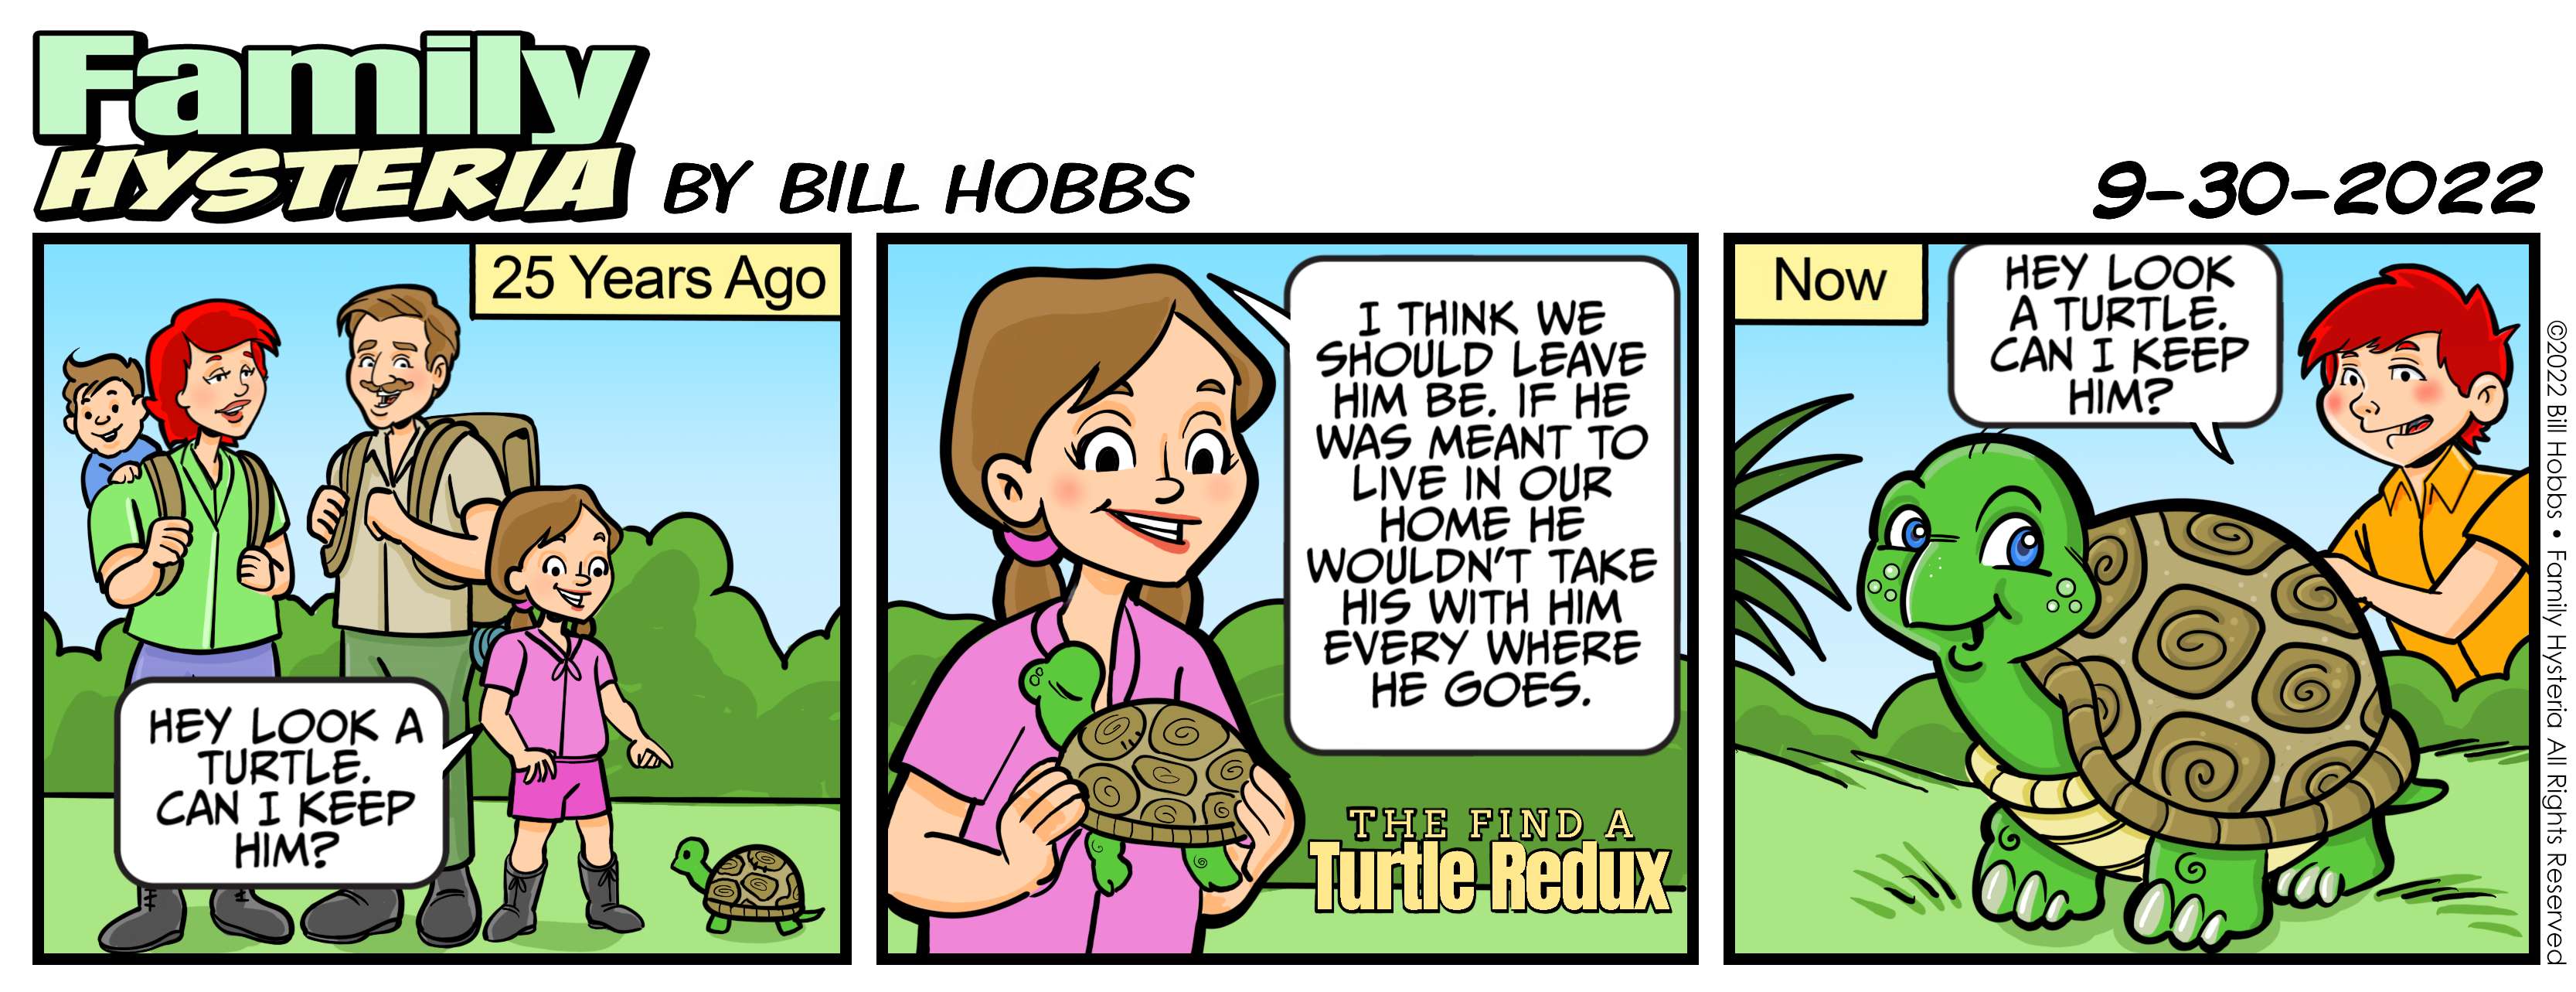 The Find A Turtle Redux